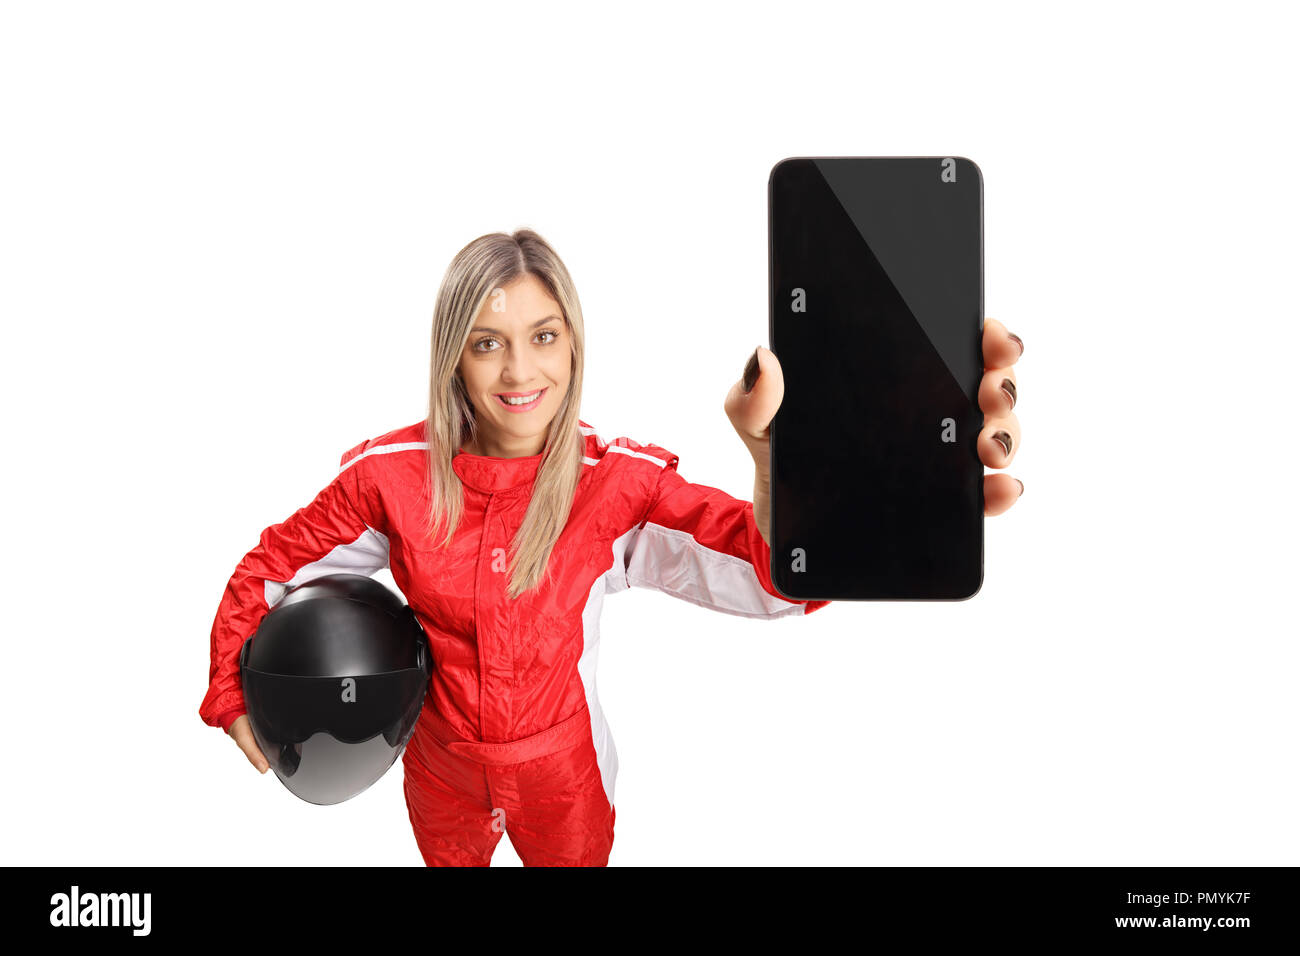 Woman racer holding a helmet and a mobile phone isolated on white background Stock Photo